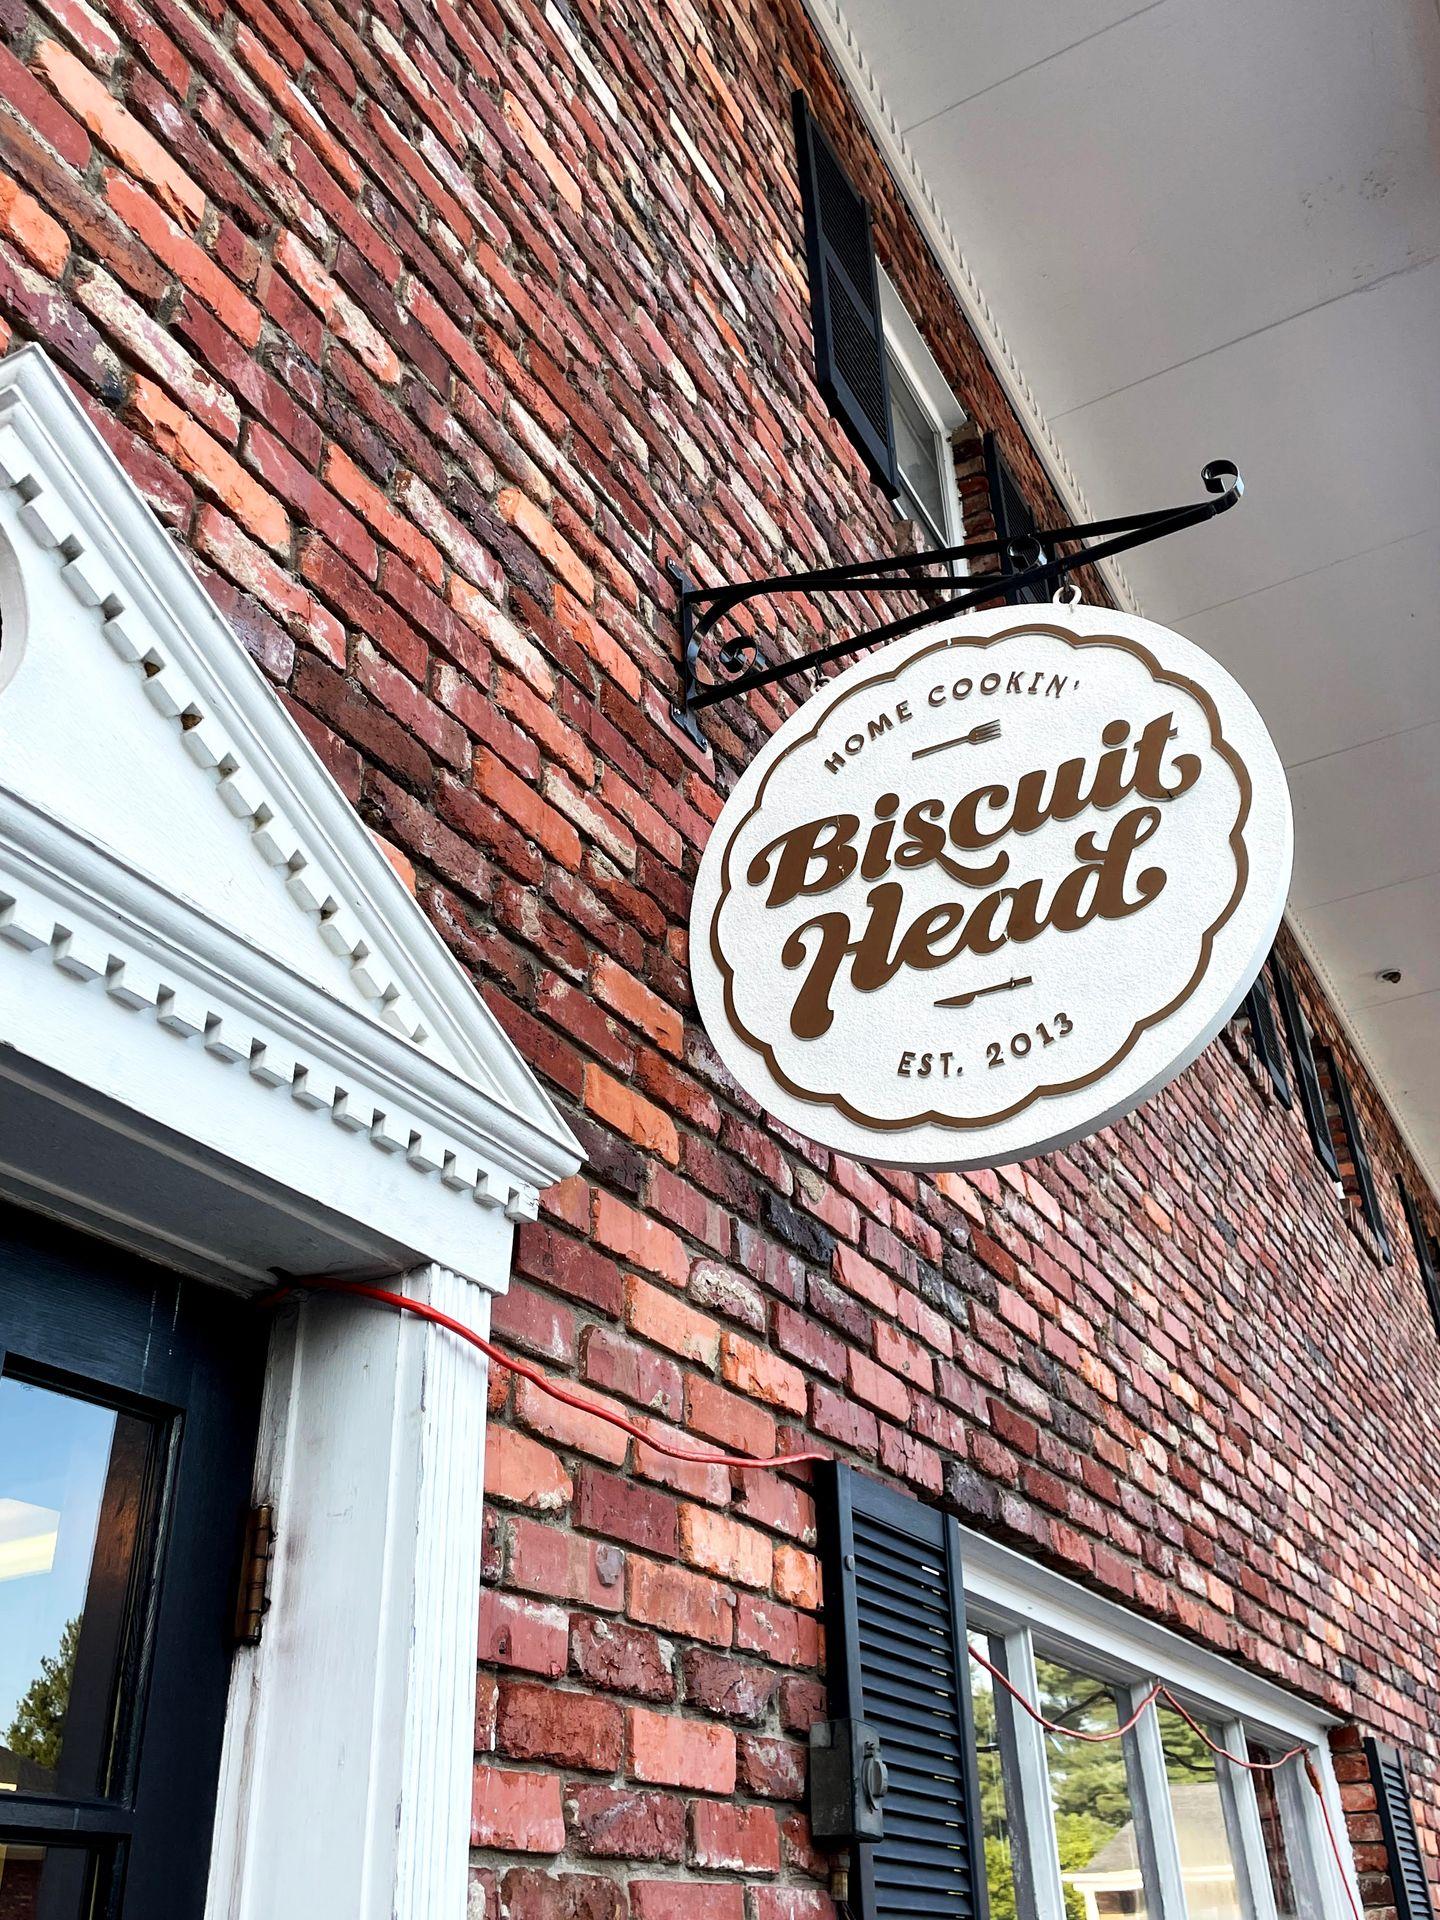 The sign for Biscuit Head at one of their locations.